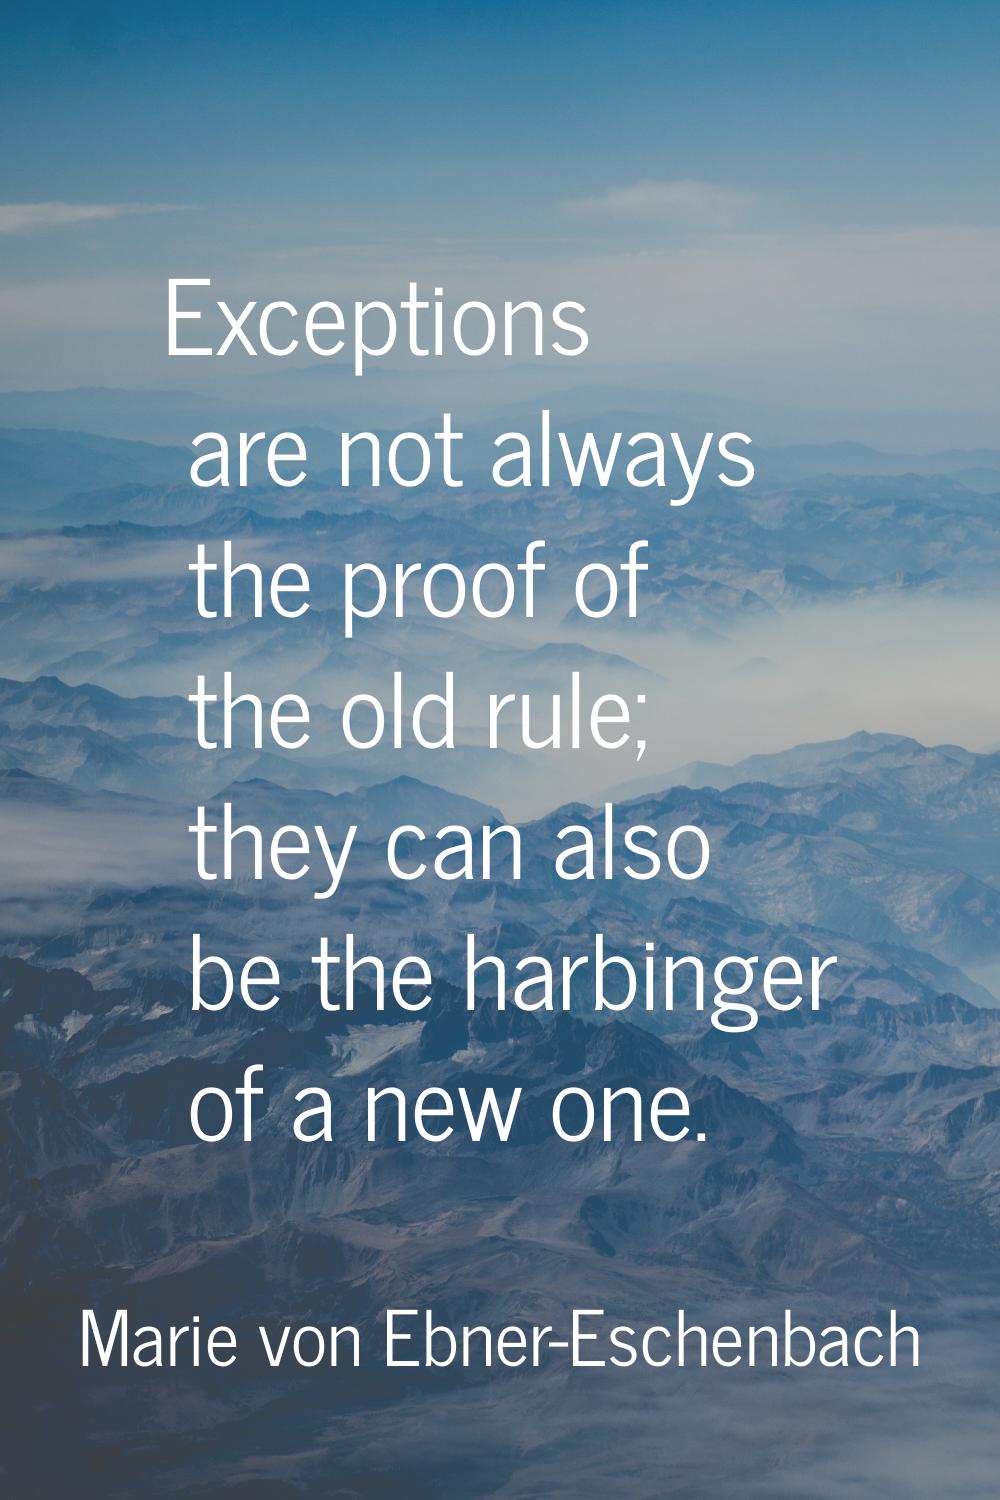 Exceptions are not always the proof of the old rule; they can also be the harbinger of a new one.